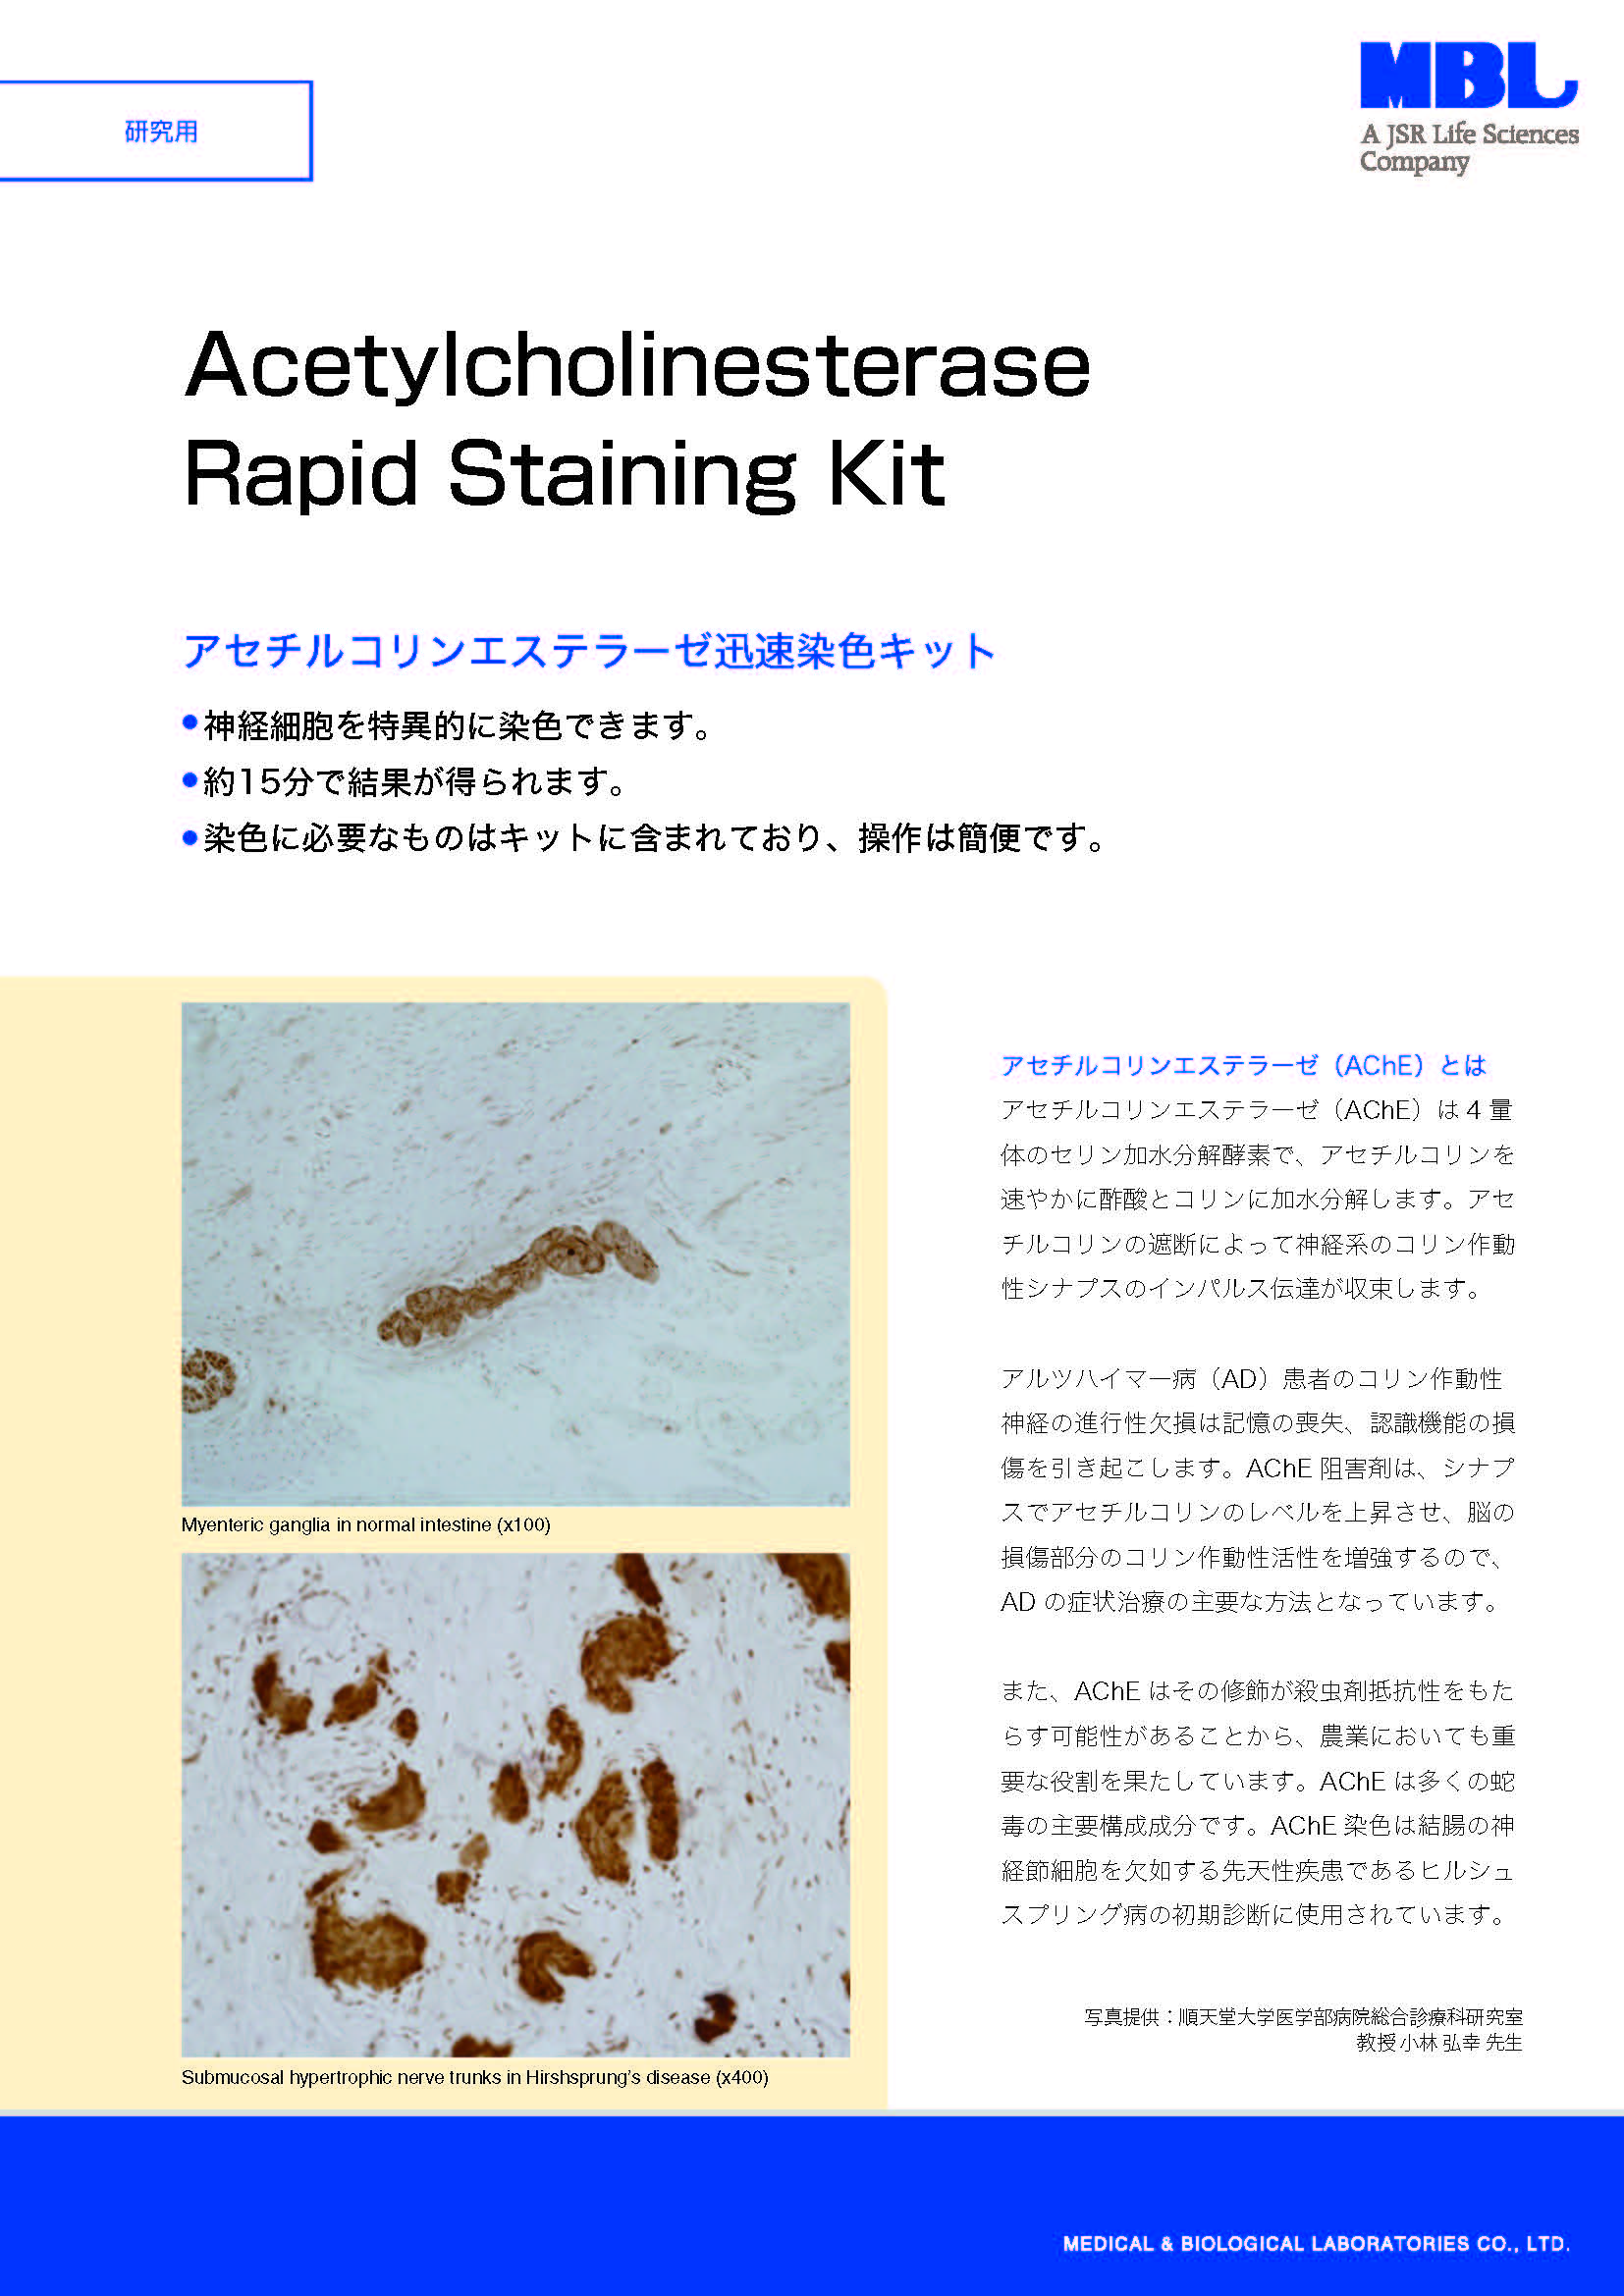 Acetylcholinesterase Rapid Staining Kit